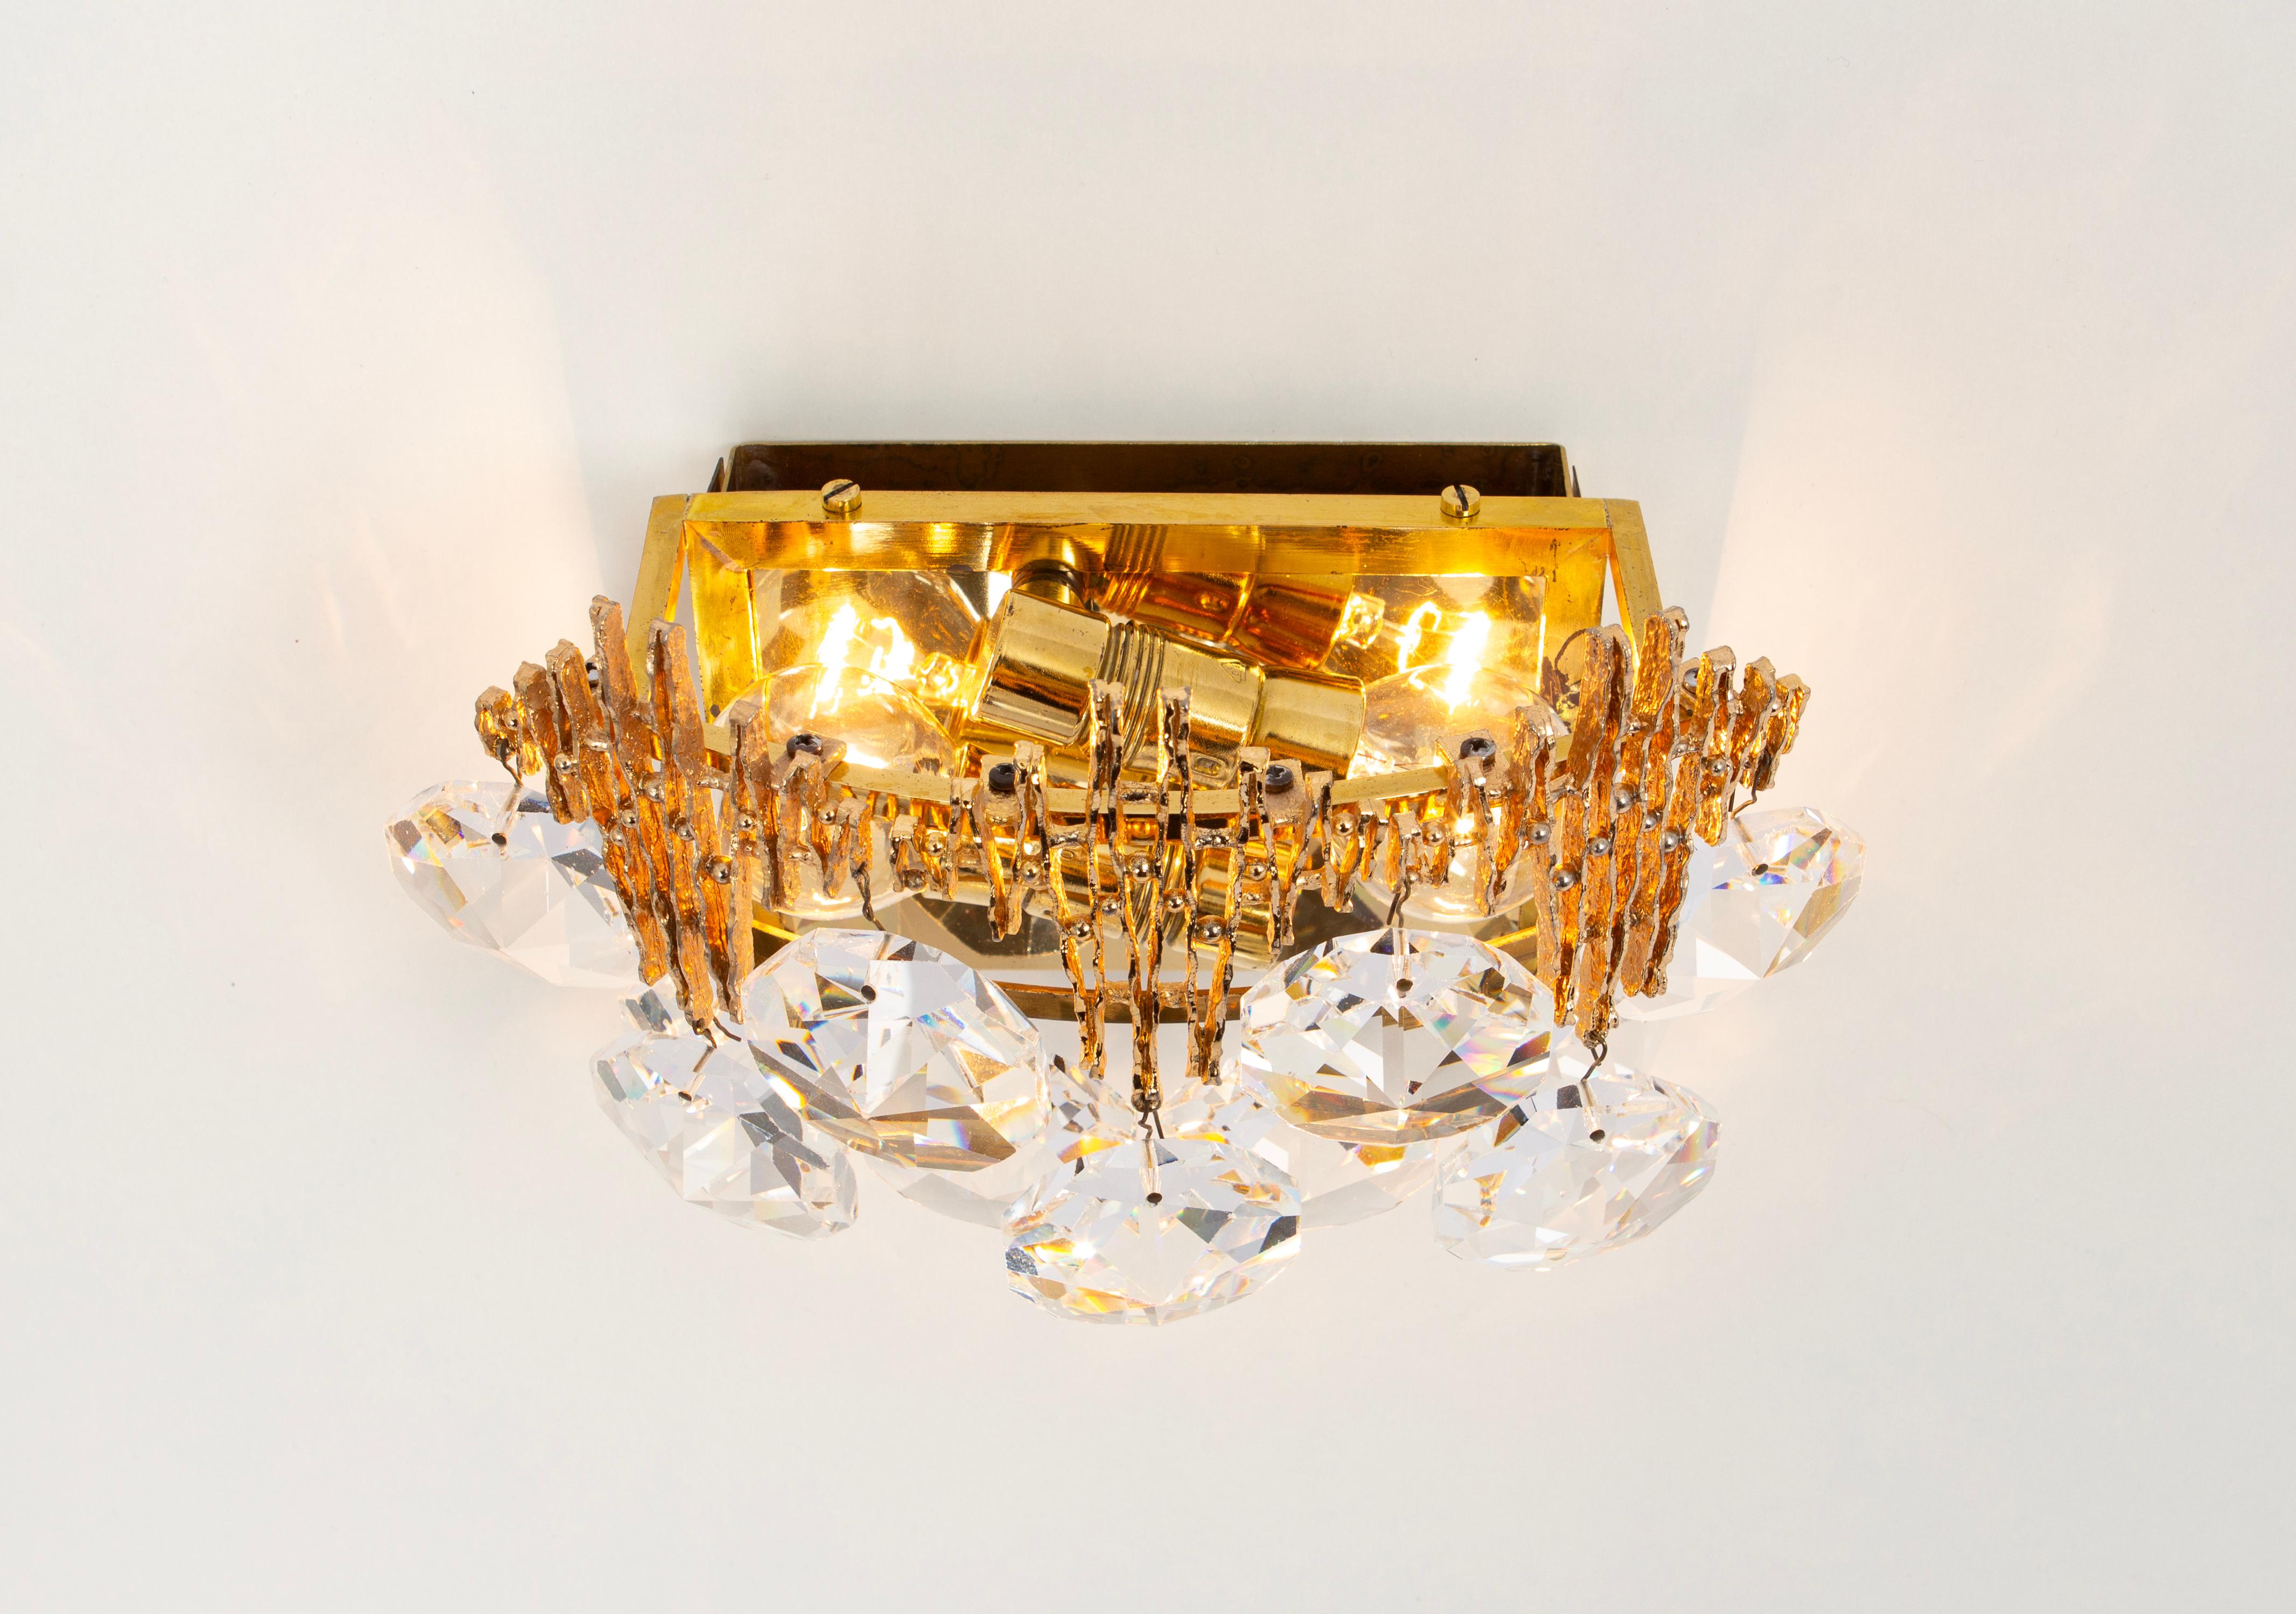 Pair of Crystal Wall Lights, Sciolari Design, Palwa, Germany, 1960s For Sale 2